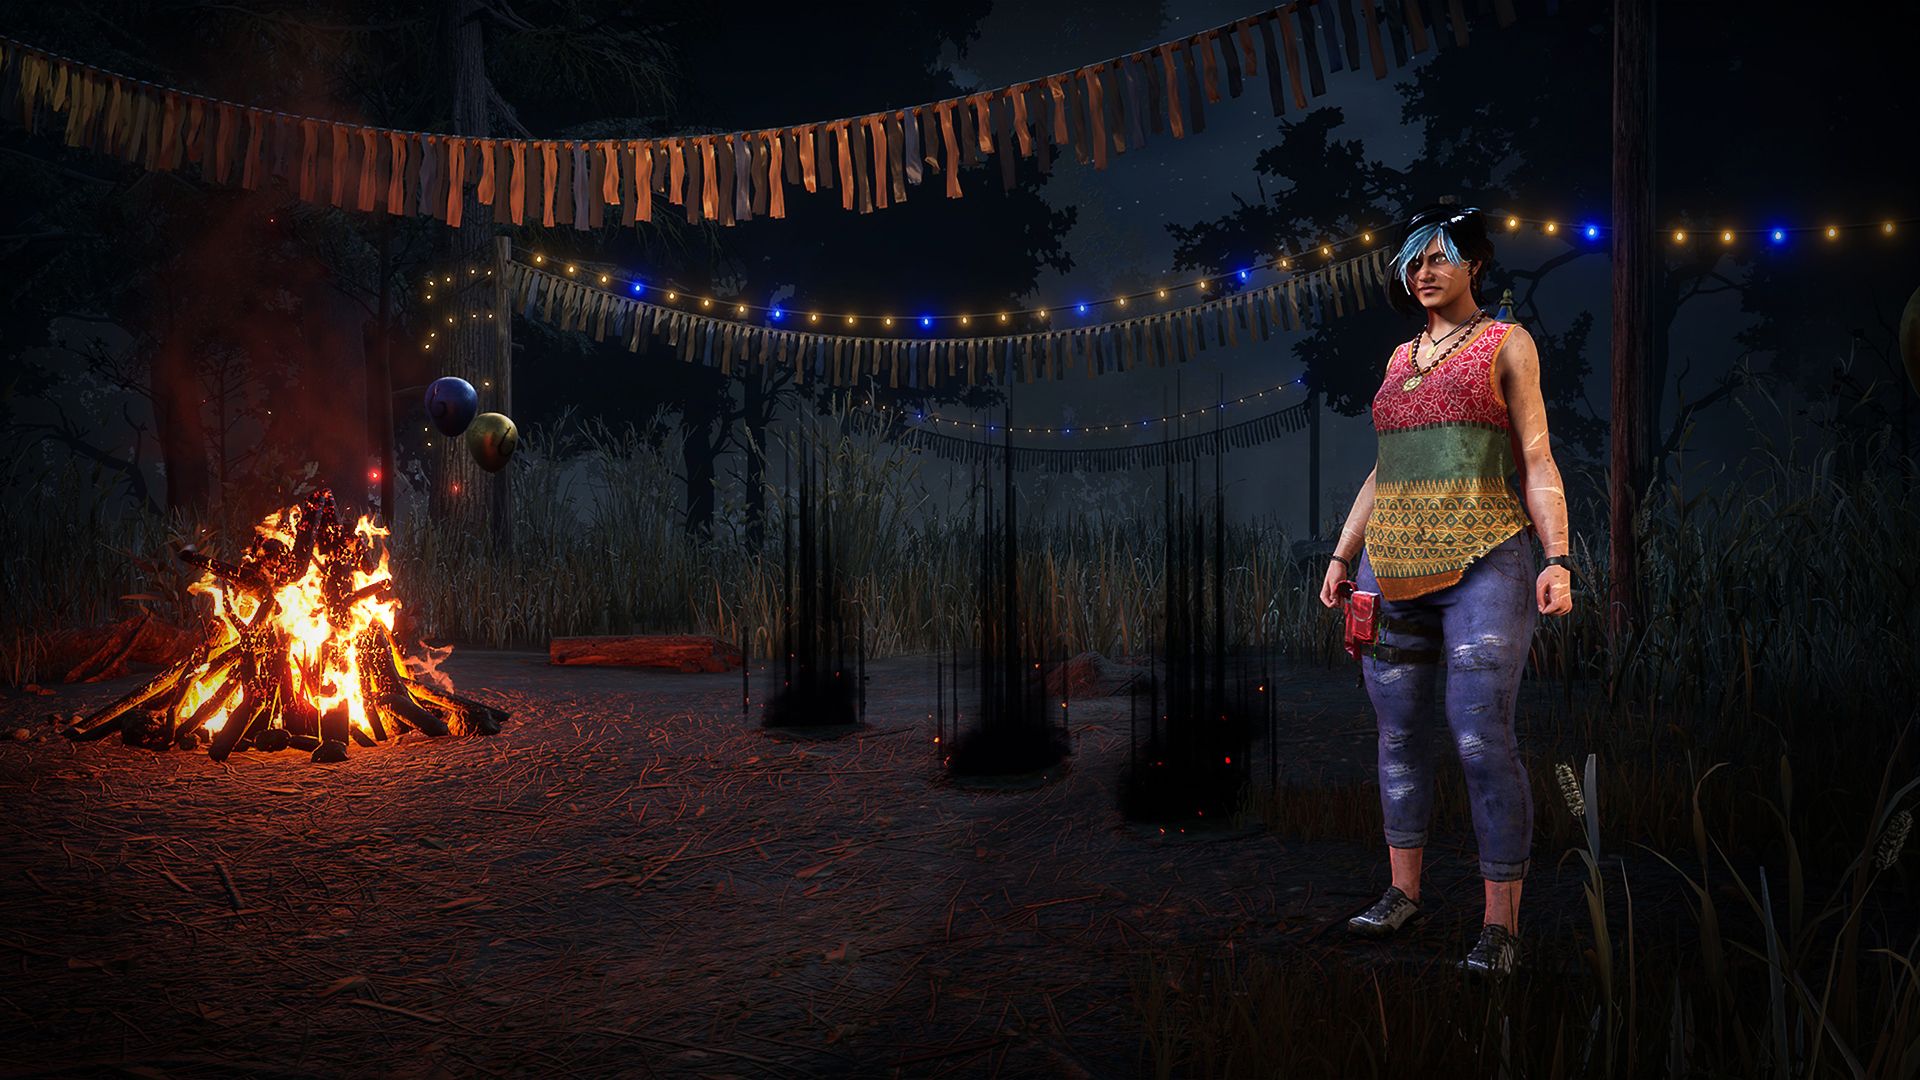 The lobby and campsite in Dead by Daylight, decorated for the sixth anniversary Twisted Masquerade event.